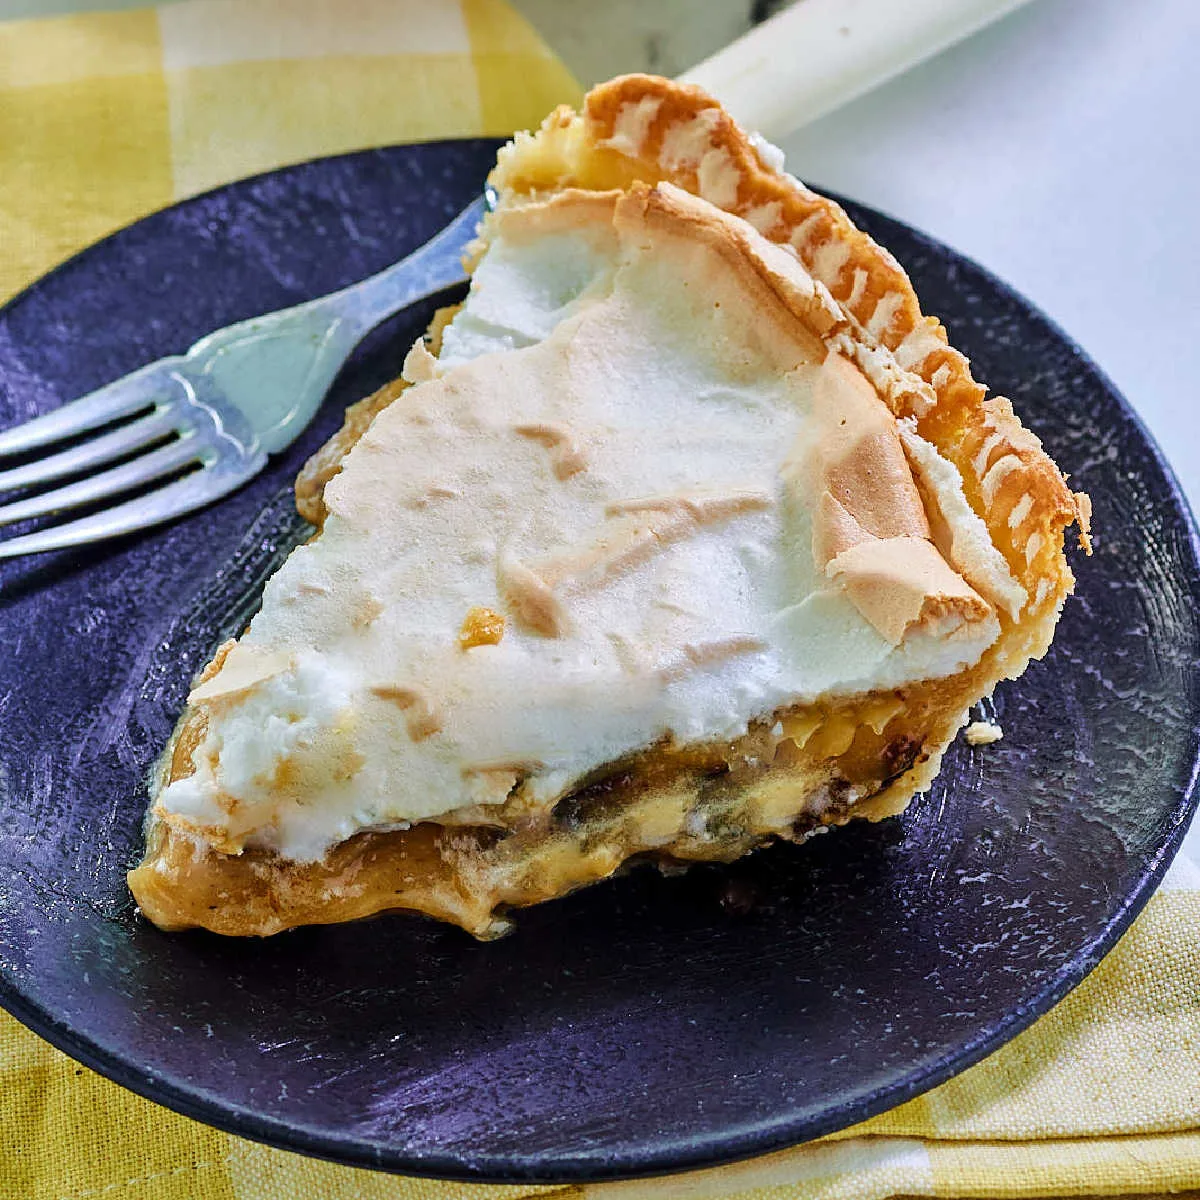 Slice of sour cream raisin pie with meringue on top on small dessert plate with fork, ready to eat.